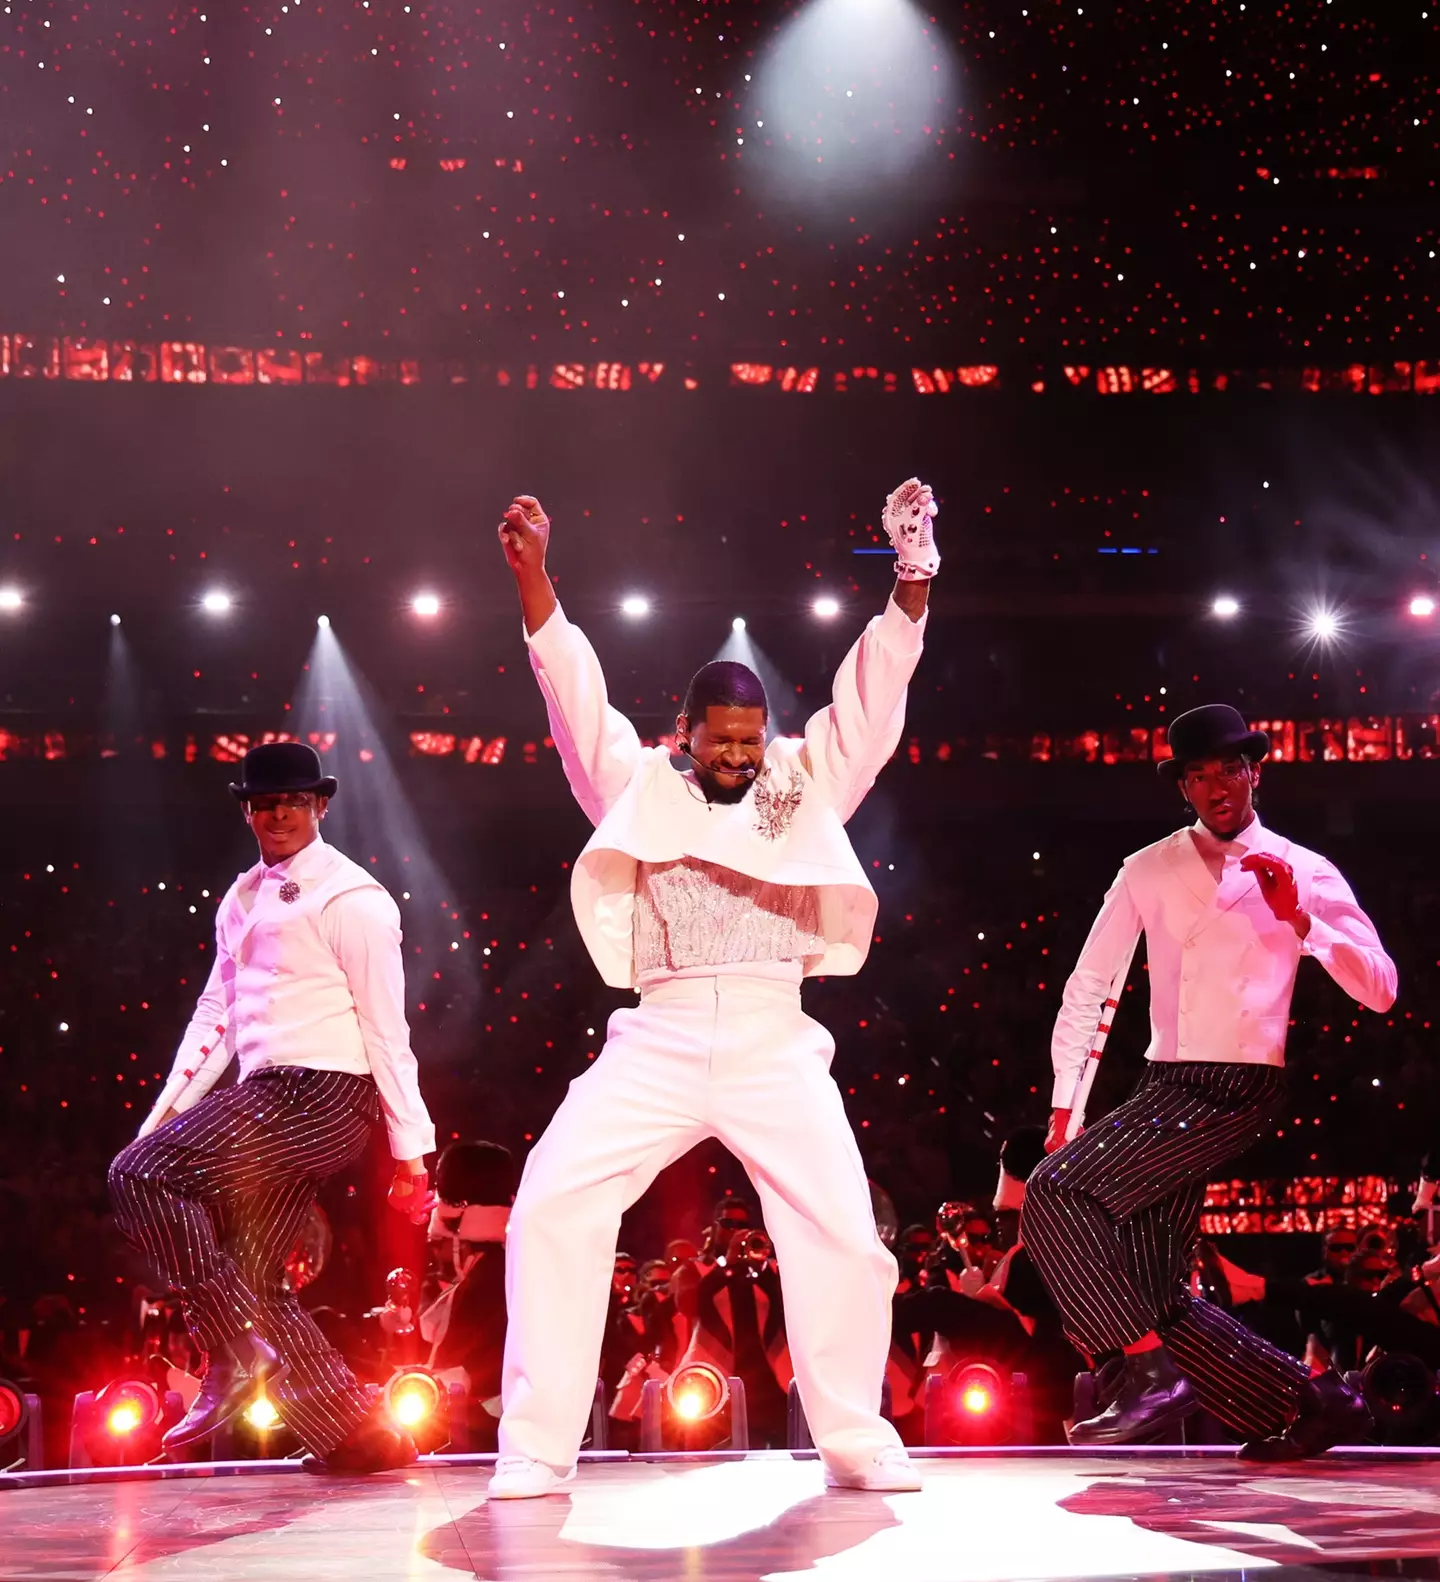 Usher in the halftime show.